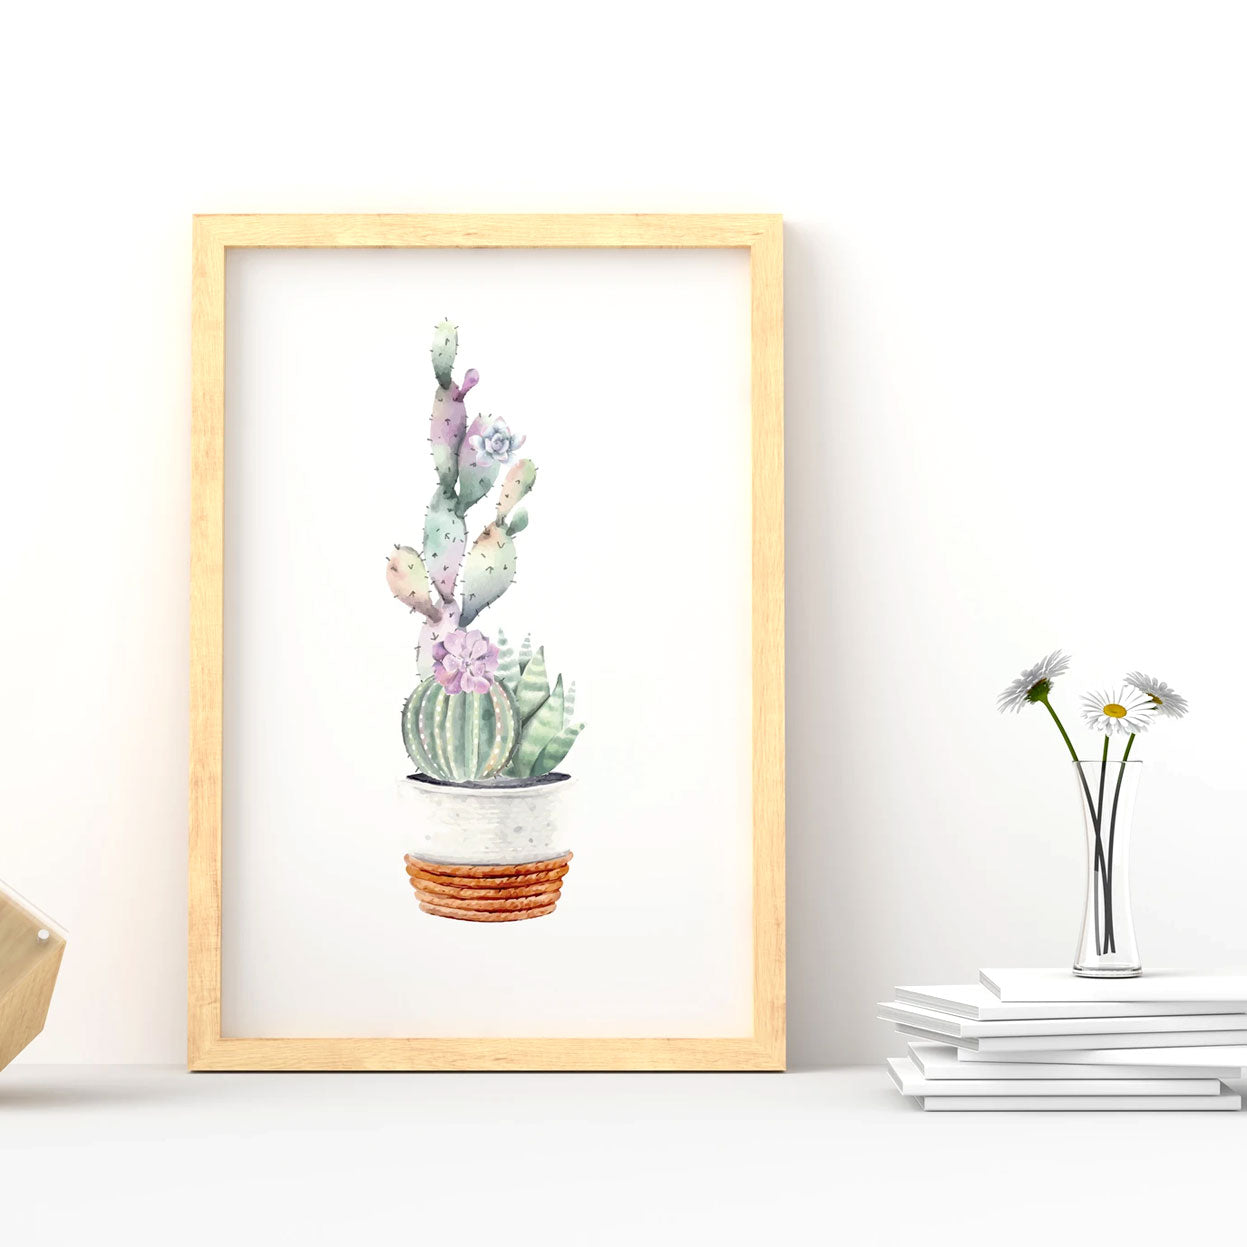 Printable Watercolor Cactus Posters for sale, Succulent Wall Art, Succulent Gift Ideas, Cactus Gifts for sale, Cactus Print Set